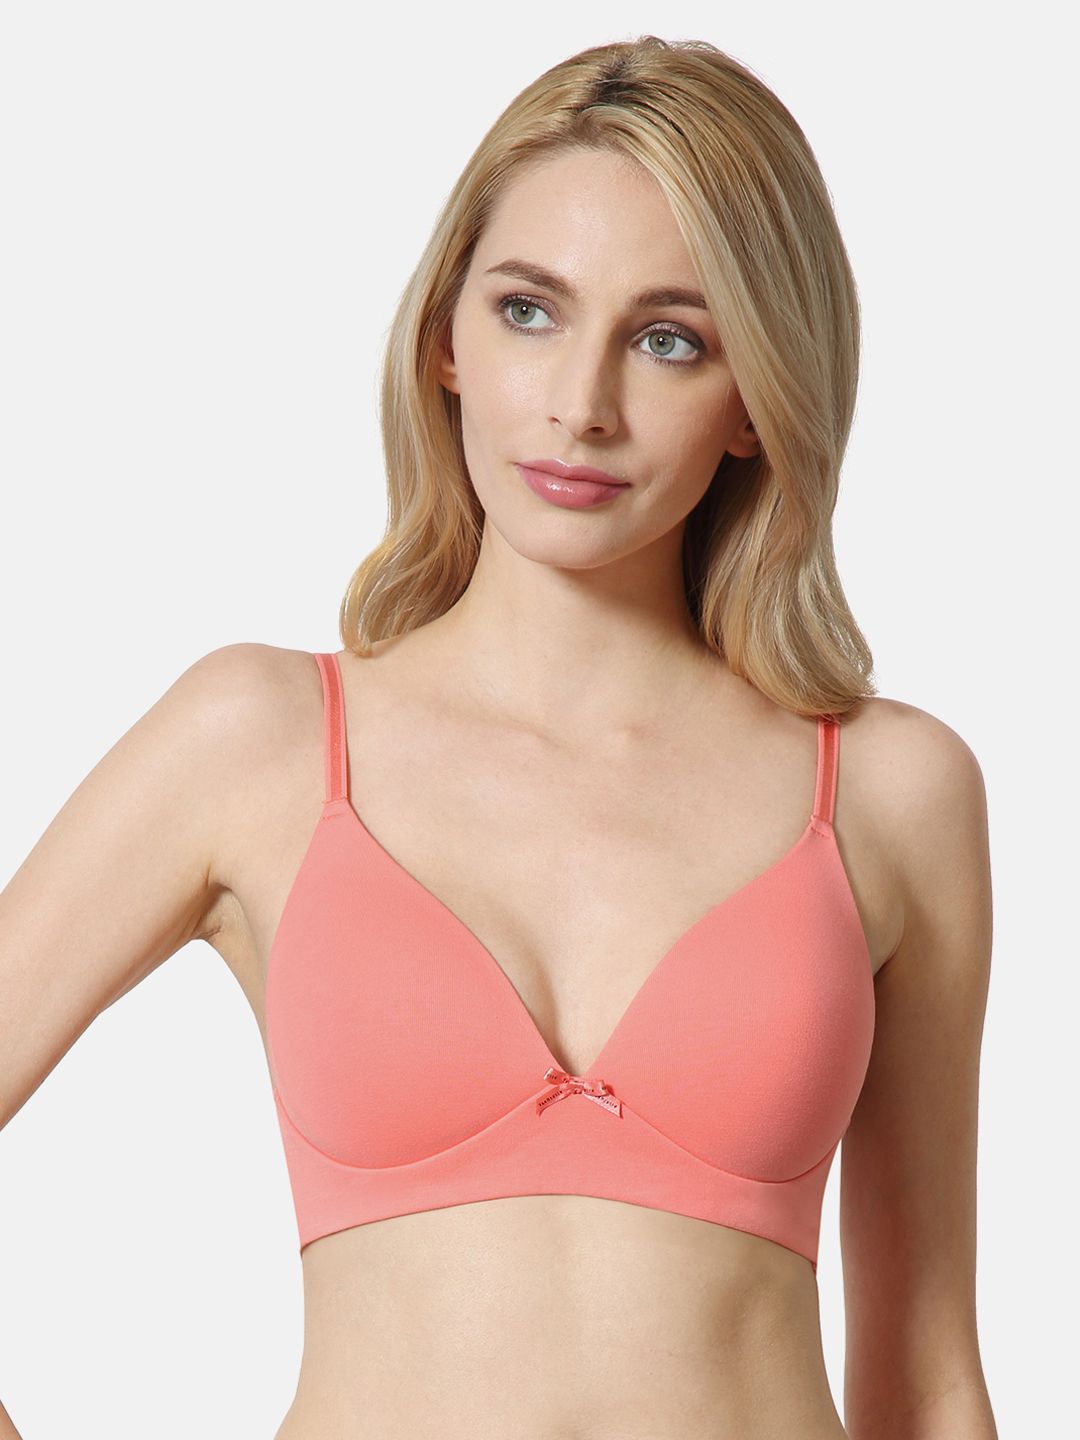 Van Heusen Pink Solid Non-Wired Lightly Padded Live-In Everyday Bra ILIBR1CSSWW3511007 Price in India